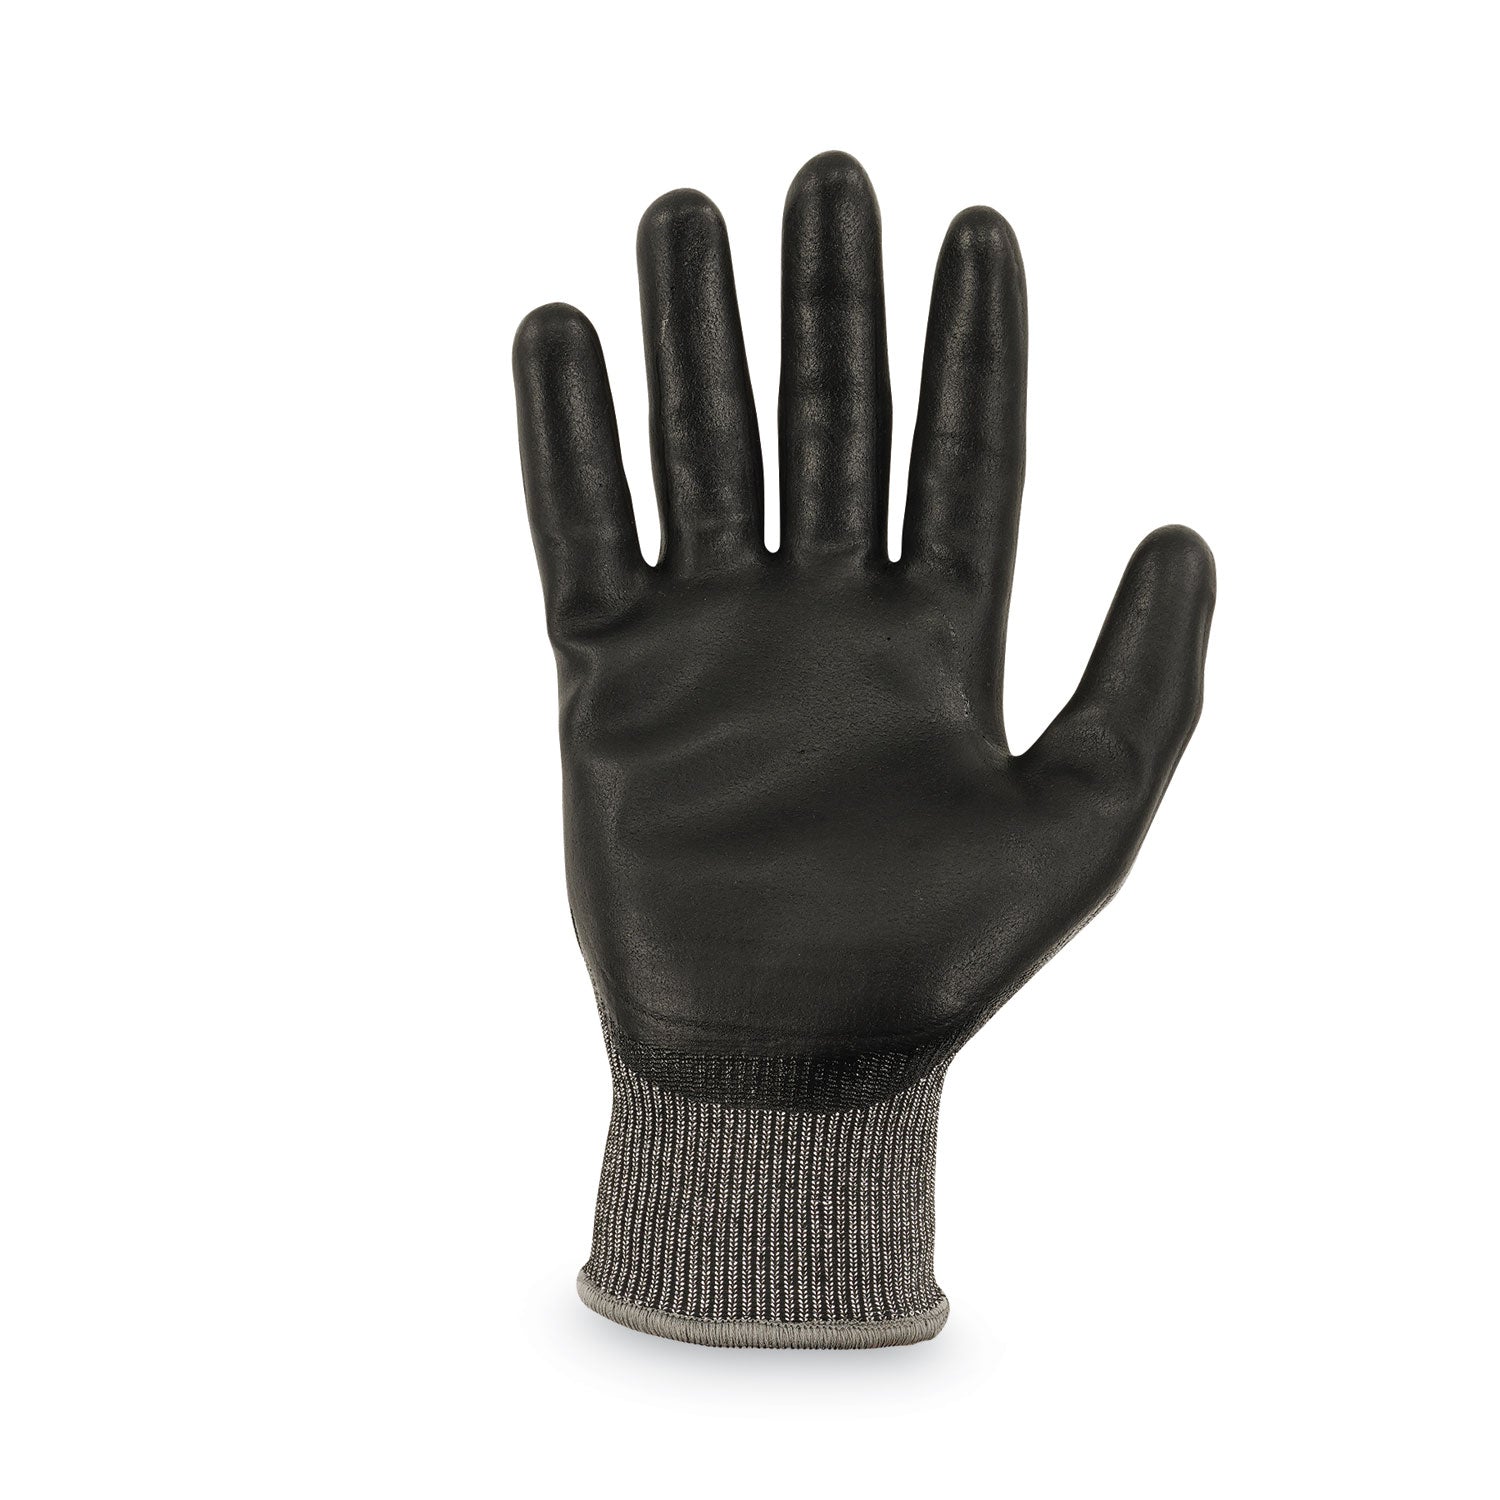 proflex-7072-ansi-a7-nitrile-coated-cr-gloves-gray-small-pair-ships-in-1-3-business-days_ego10312 - 6